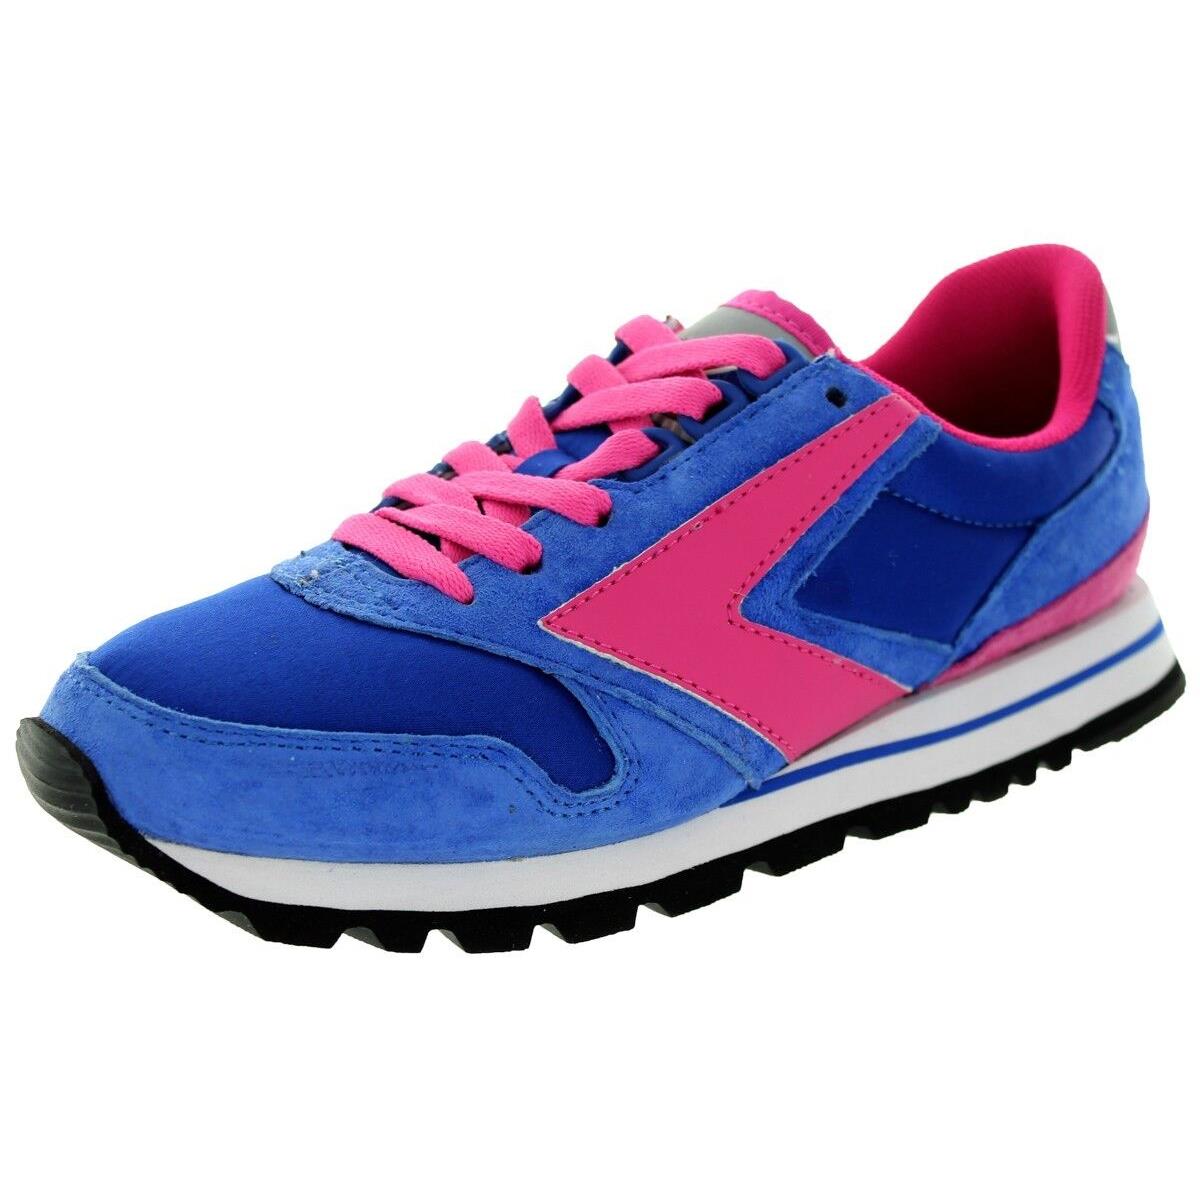 Brooks Heritage Chariot Women 496 Blue Pink Suede Retro Running Shoes 6 - 10